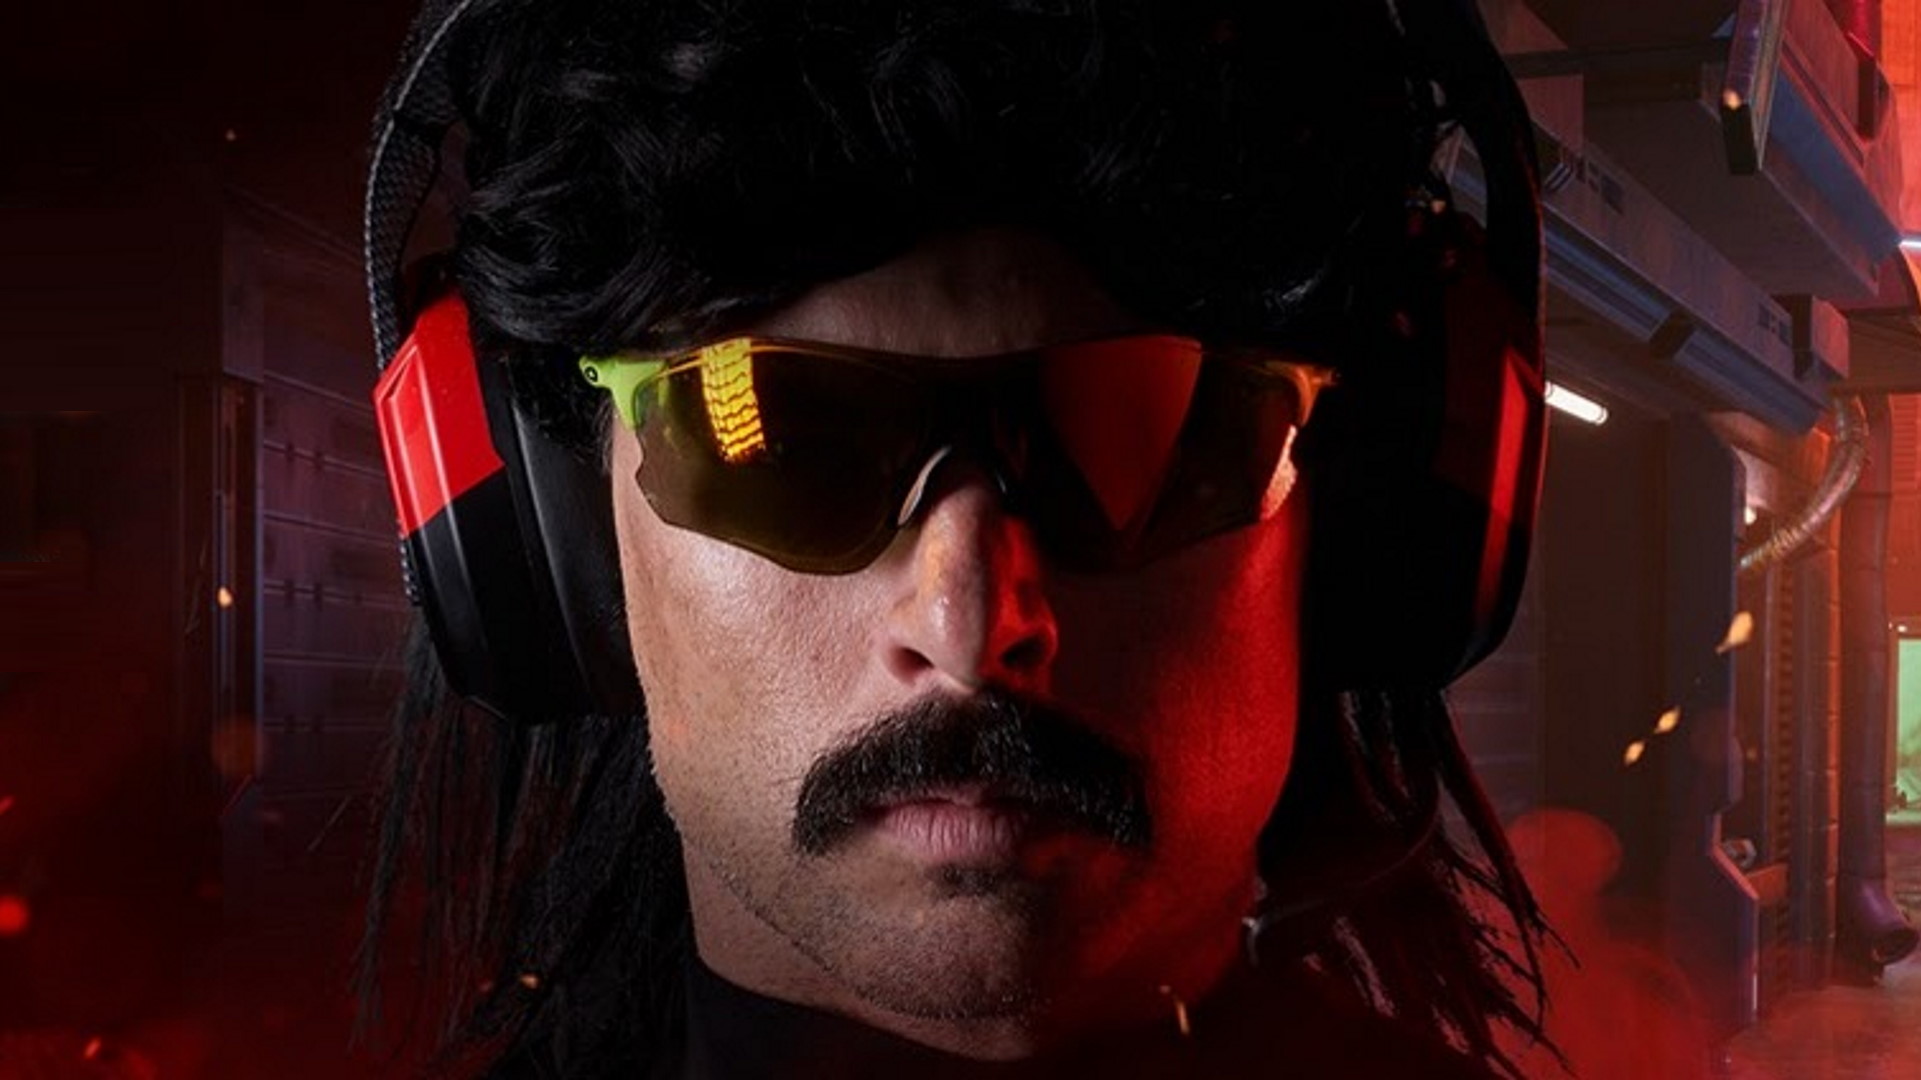  Dr Disrespect's Call of Duty account suspended after he's disrespectful in proxy chat 